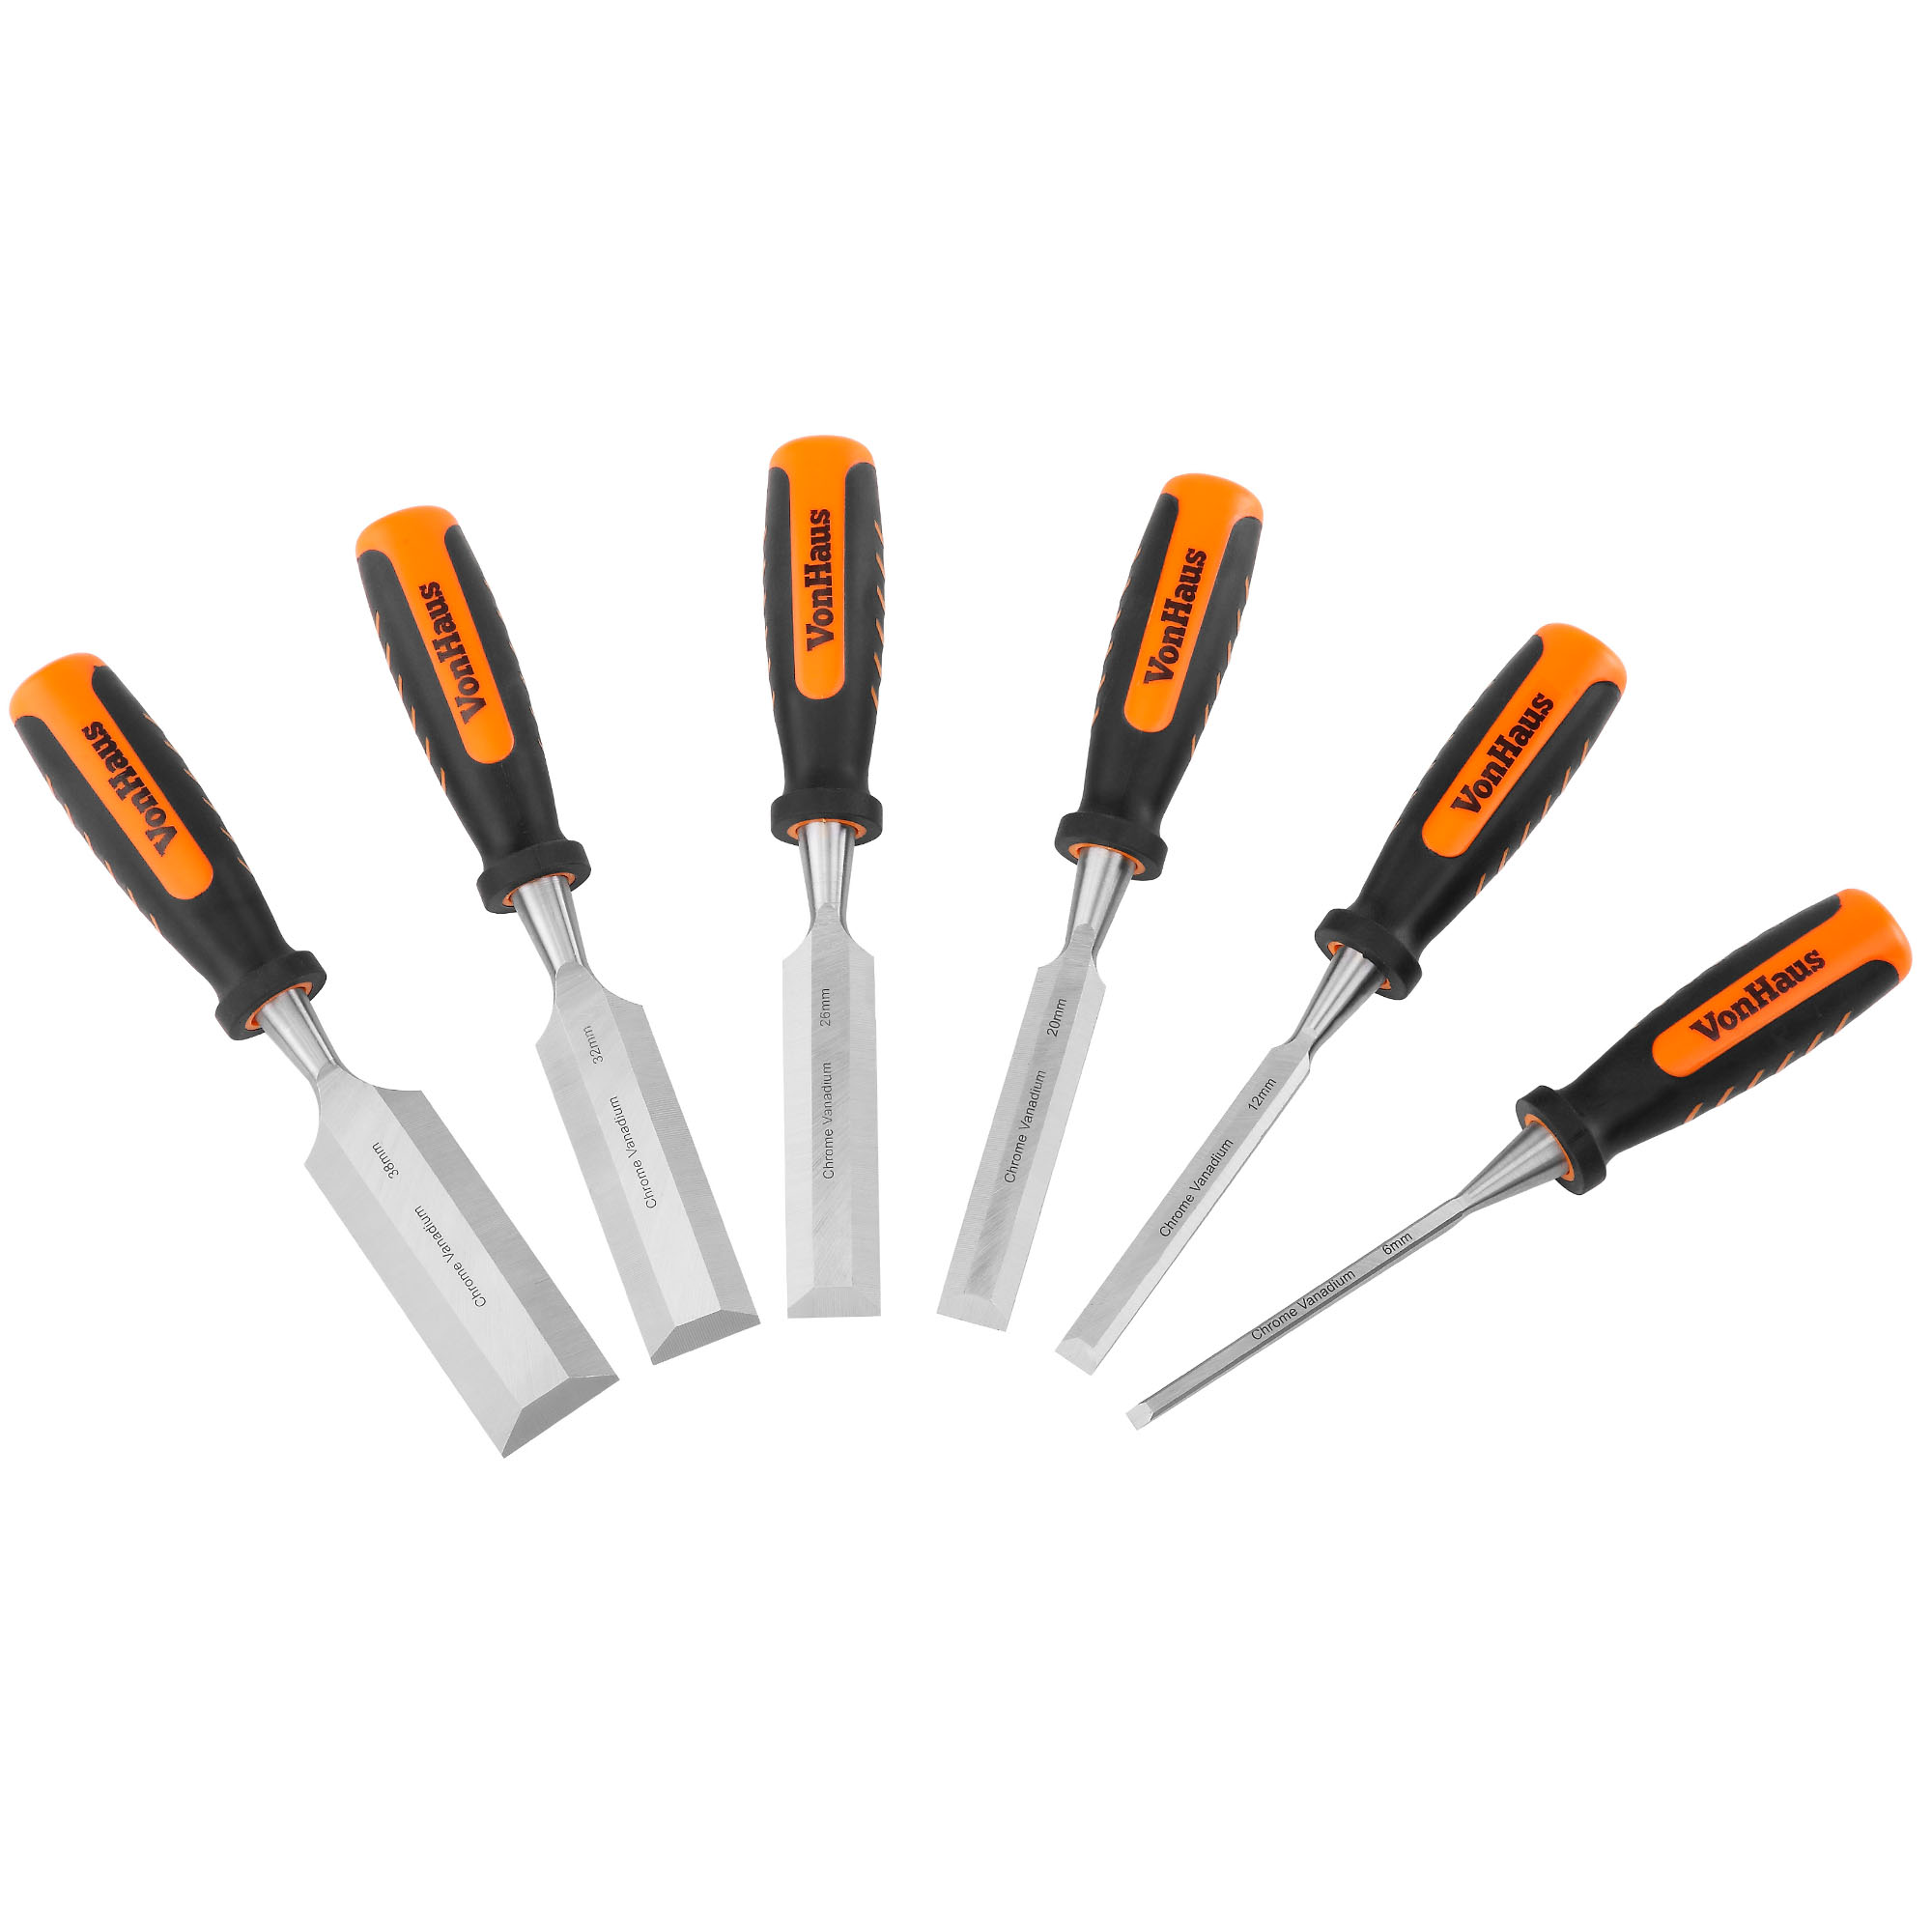 VonHaus 8 Piece Wood Chisel Set with Honing Guide 